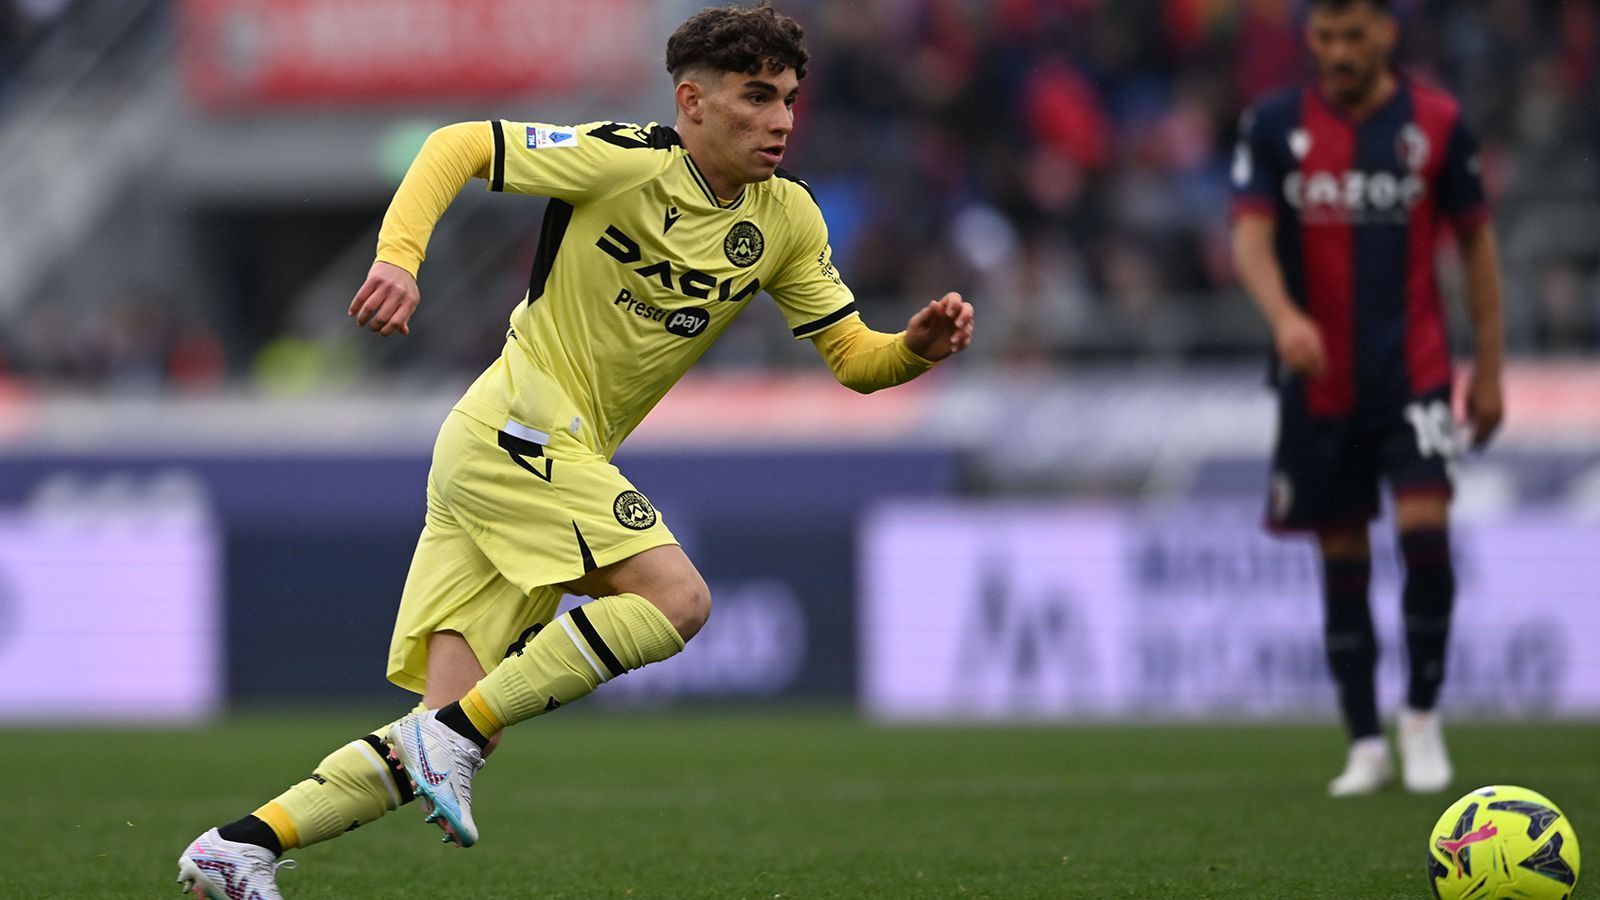 
                <strong>Serie A</strong><br>
                &#x2022; Simone Pafundi<br>&#x2022; Eingesetzt am: 5. Februar 2023<br>&#x2022; Damaliges Alter: 16 Jahre, 10 Monate, 22 Tage<br>&#x2022; Verein: Udinese Calcio<br>
              